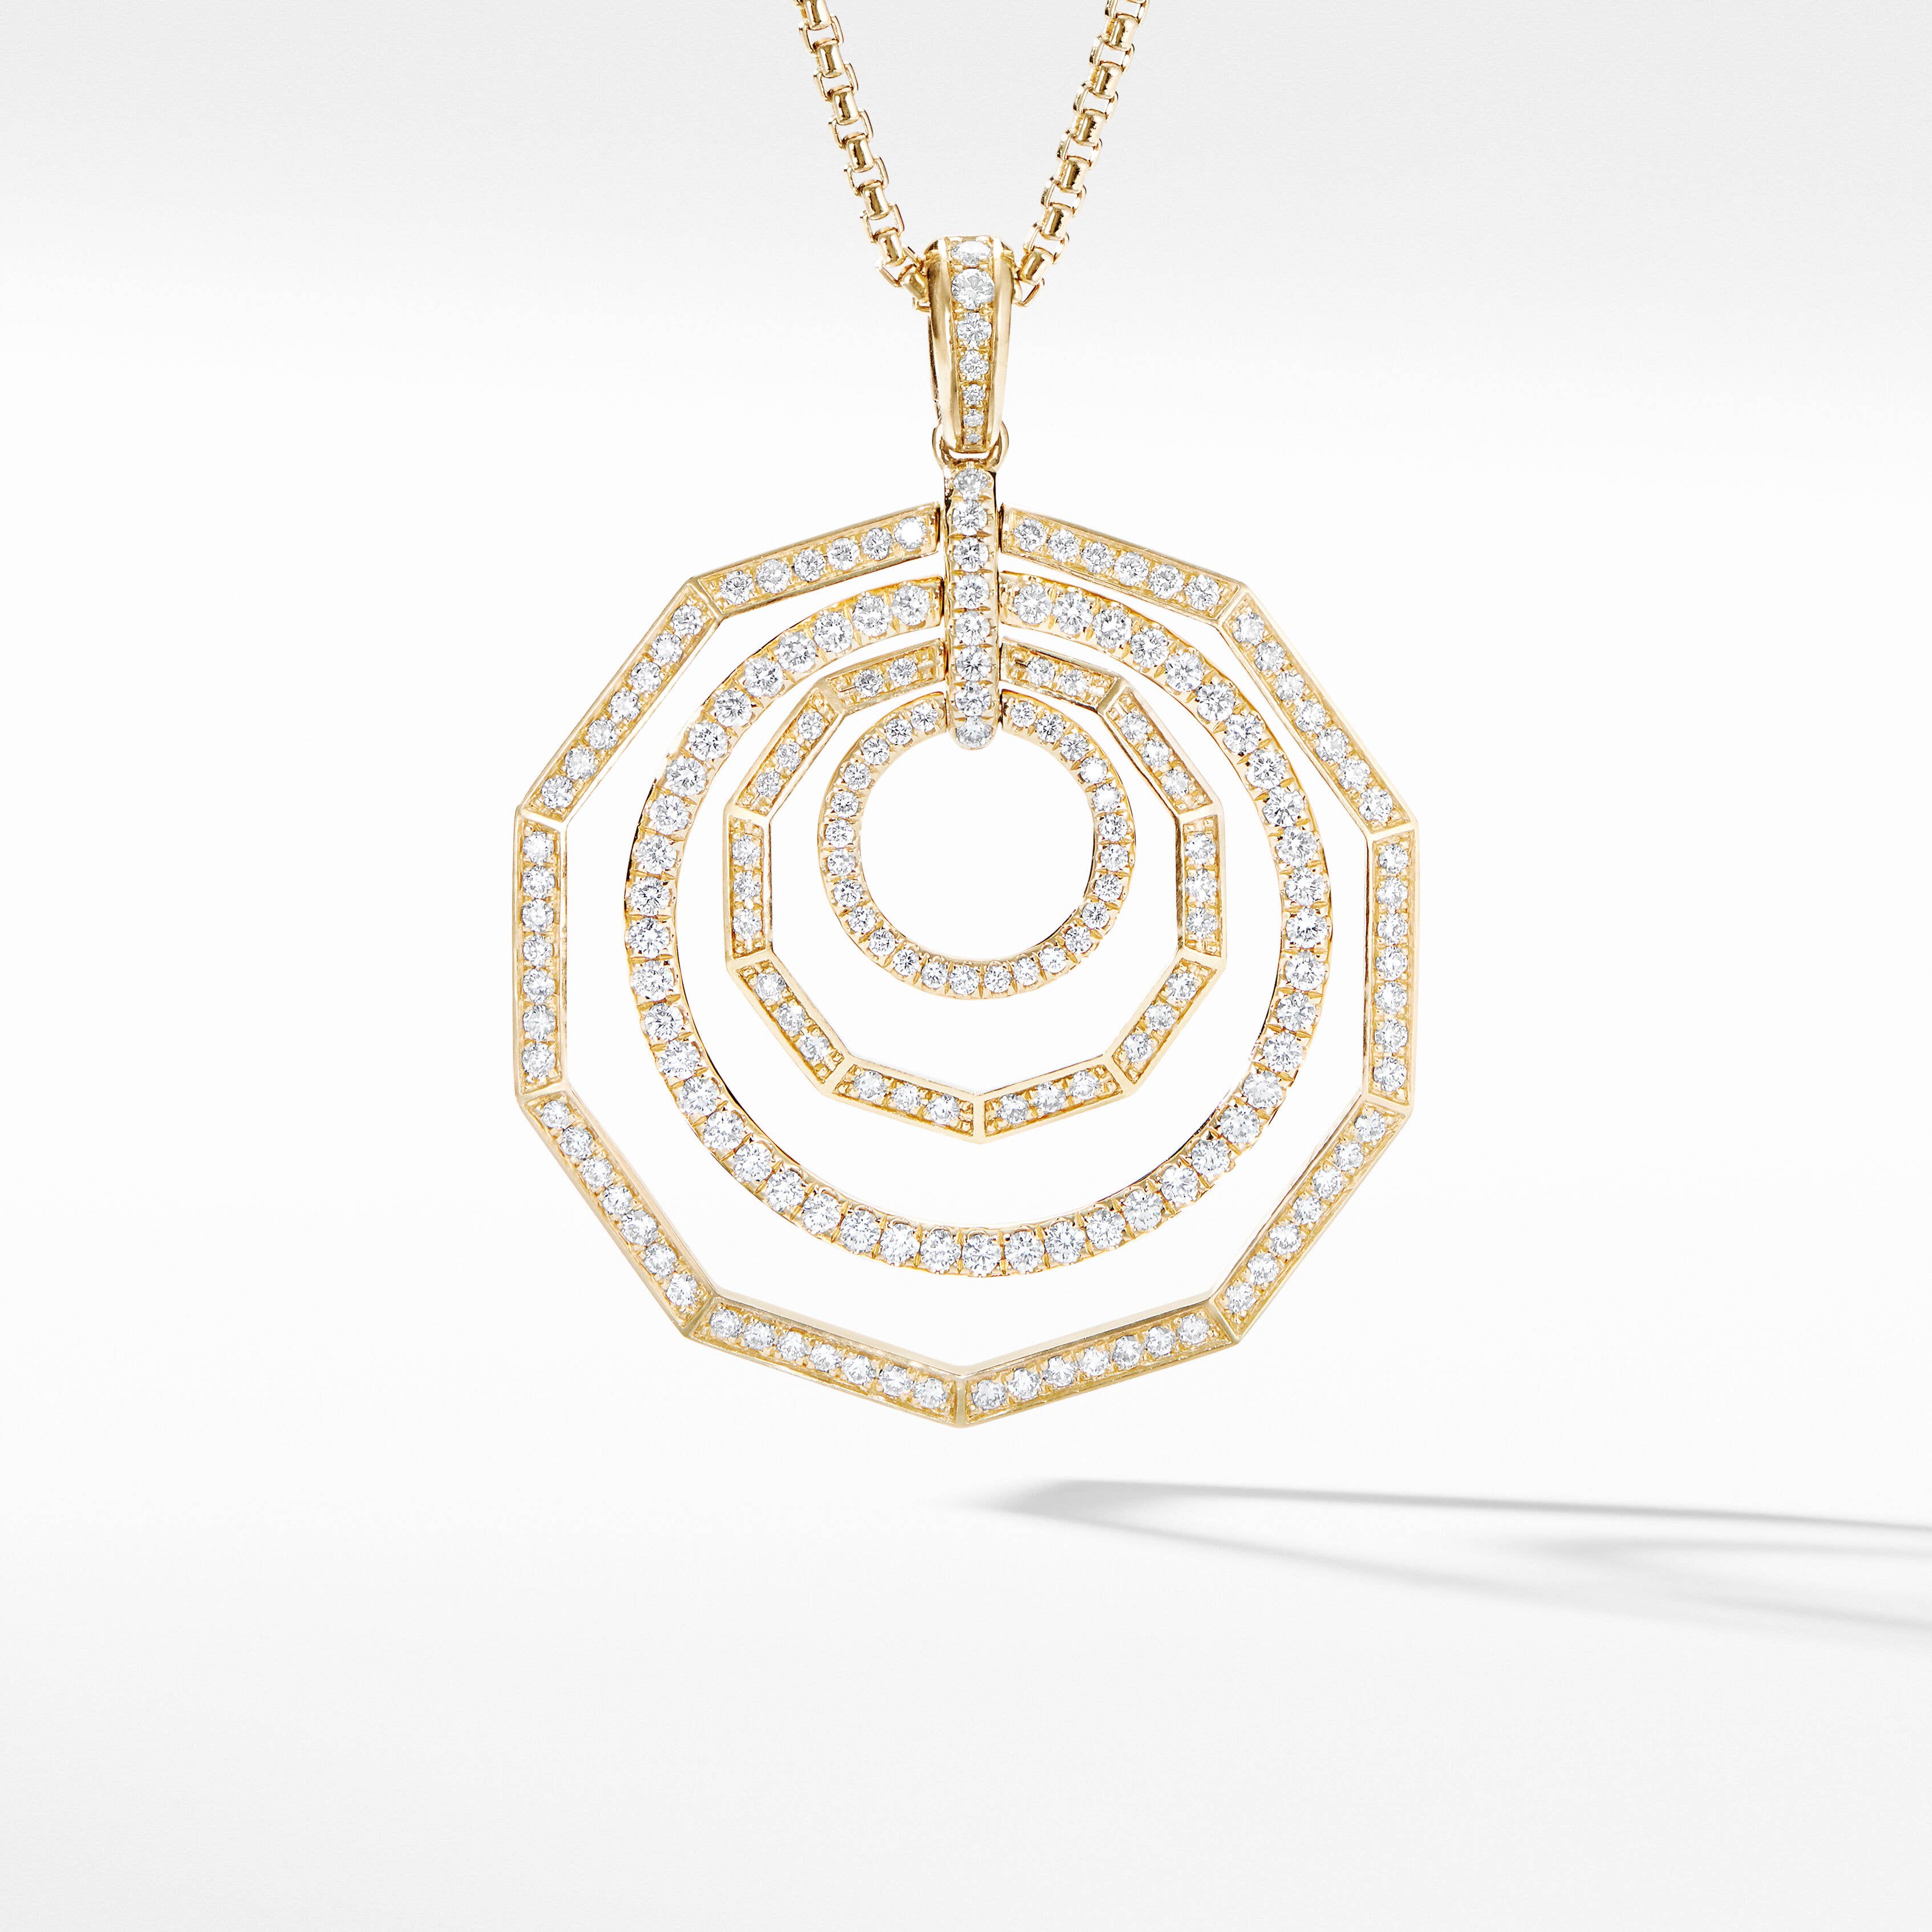 Stax Pendant Necklace in 18K Yellow Gold with Full Pavé Diamonds